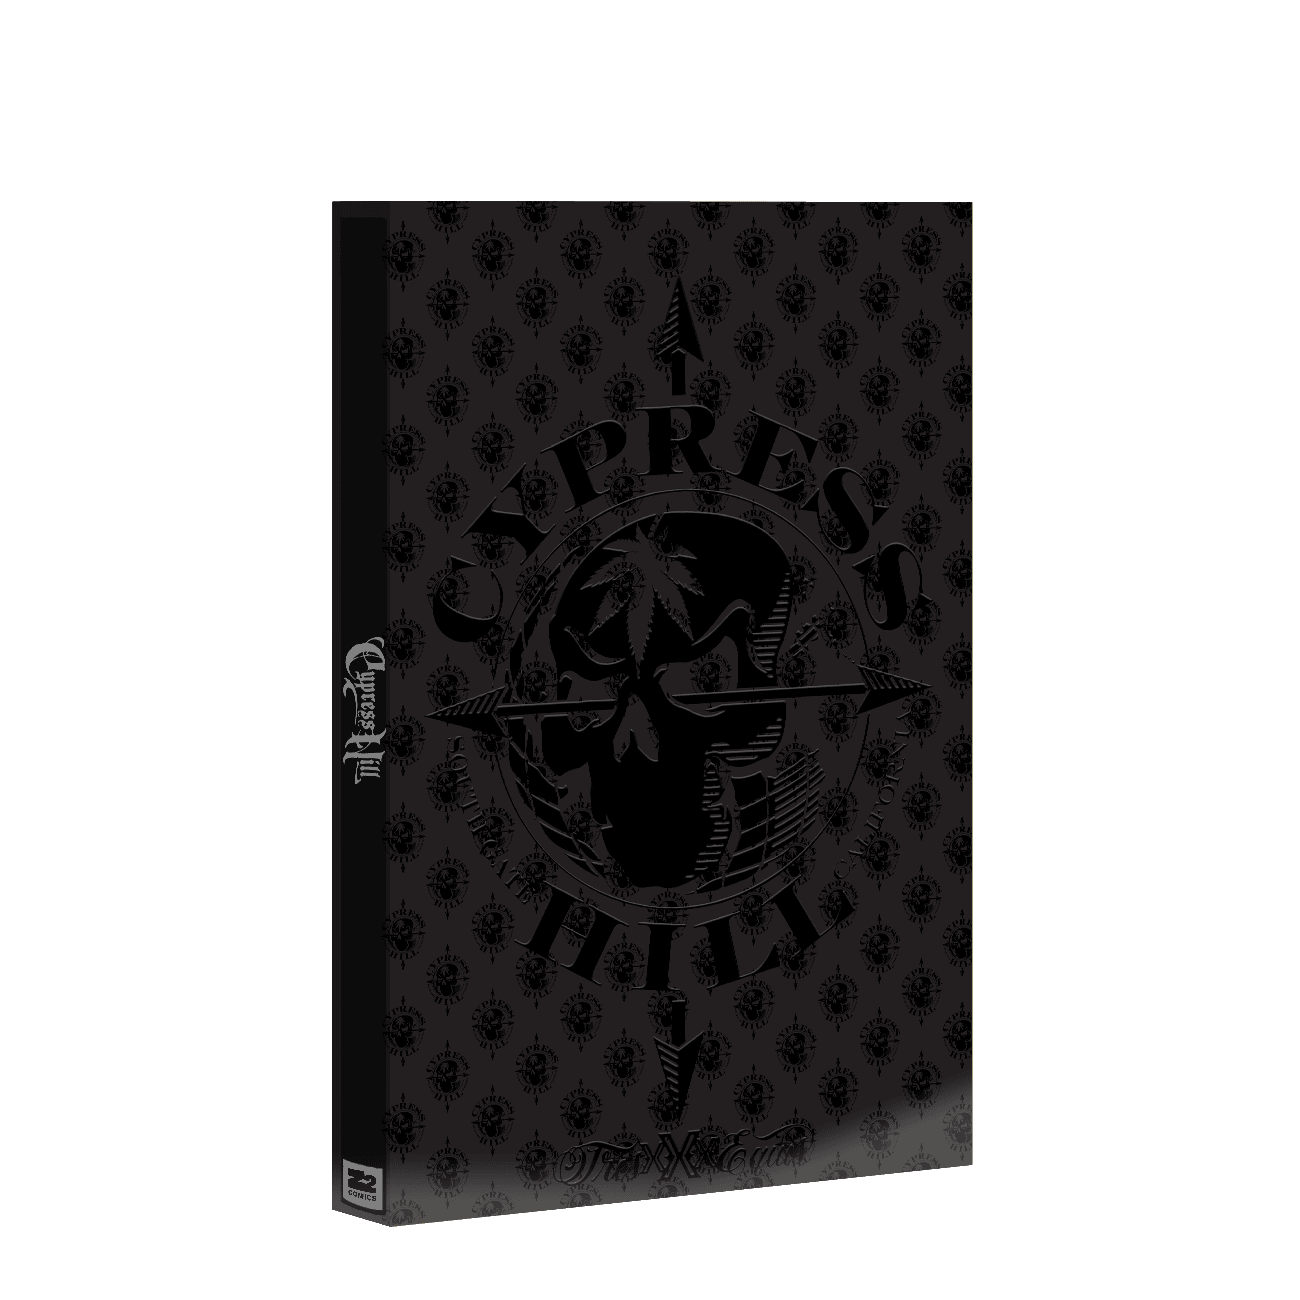 Cypress Hill: Tres Equis Slipcase